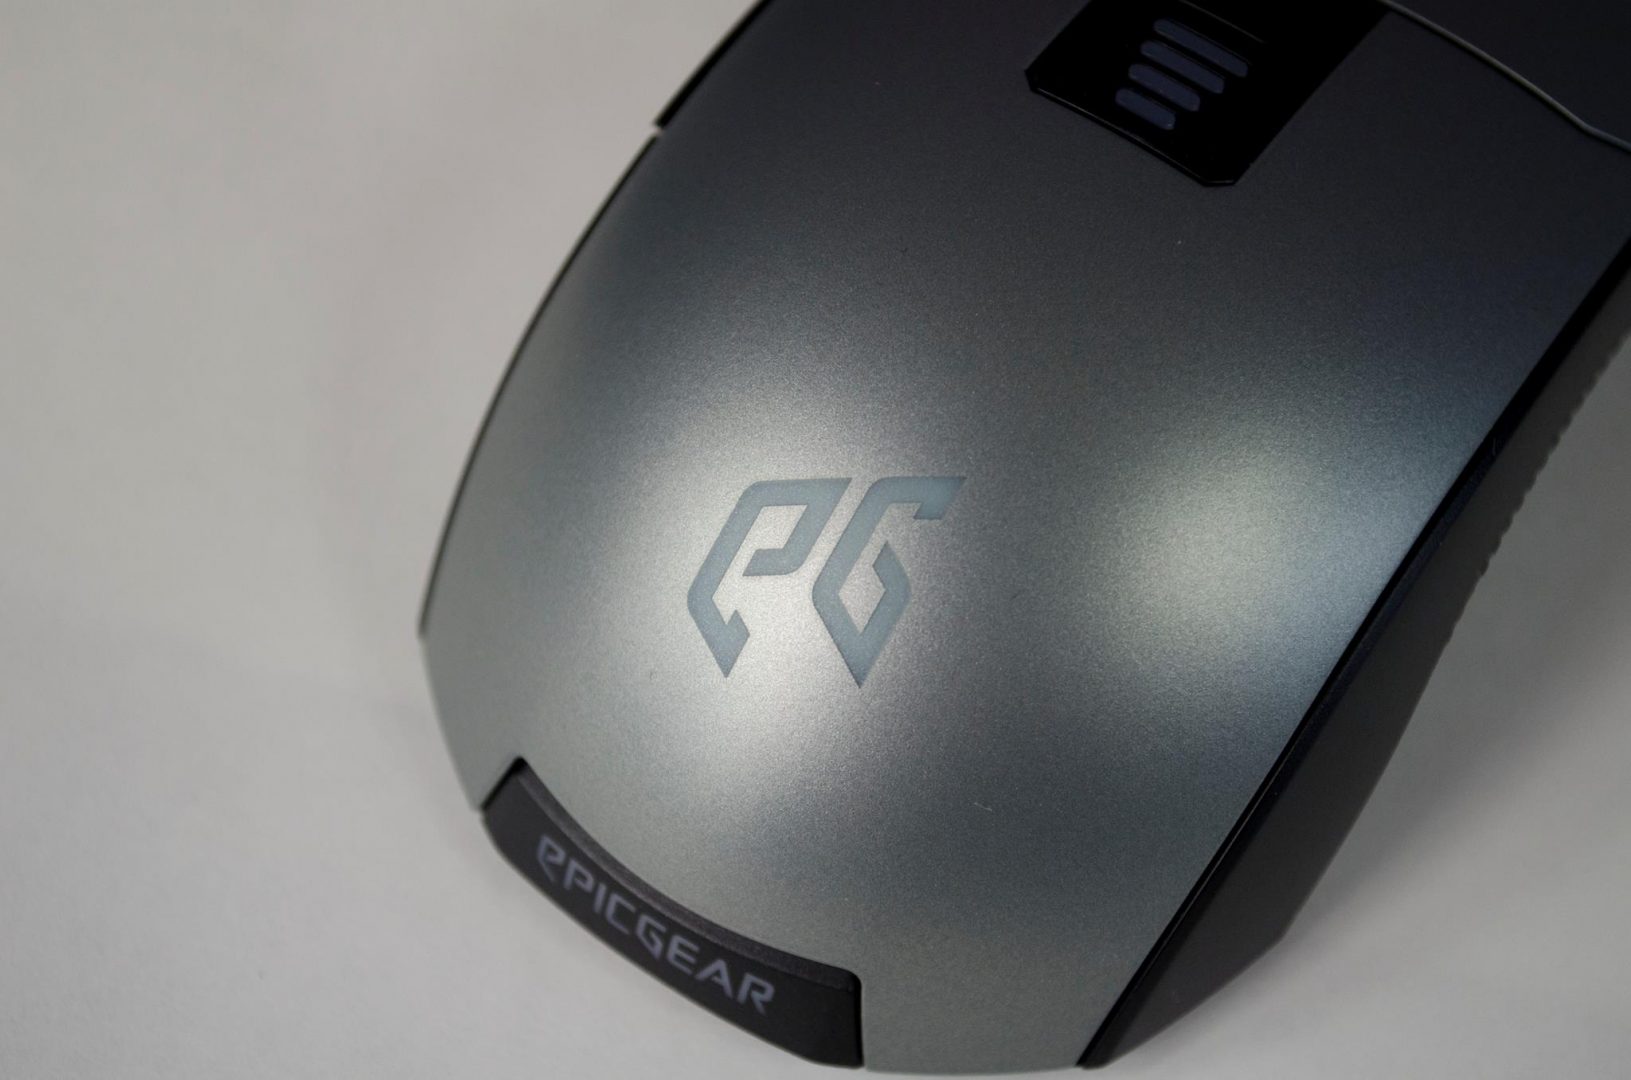 epic gear morpha x gaming mouse_13